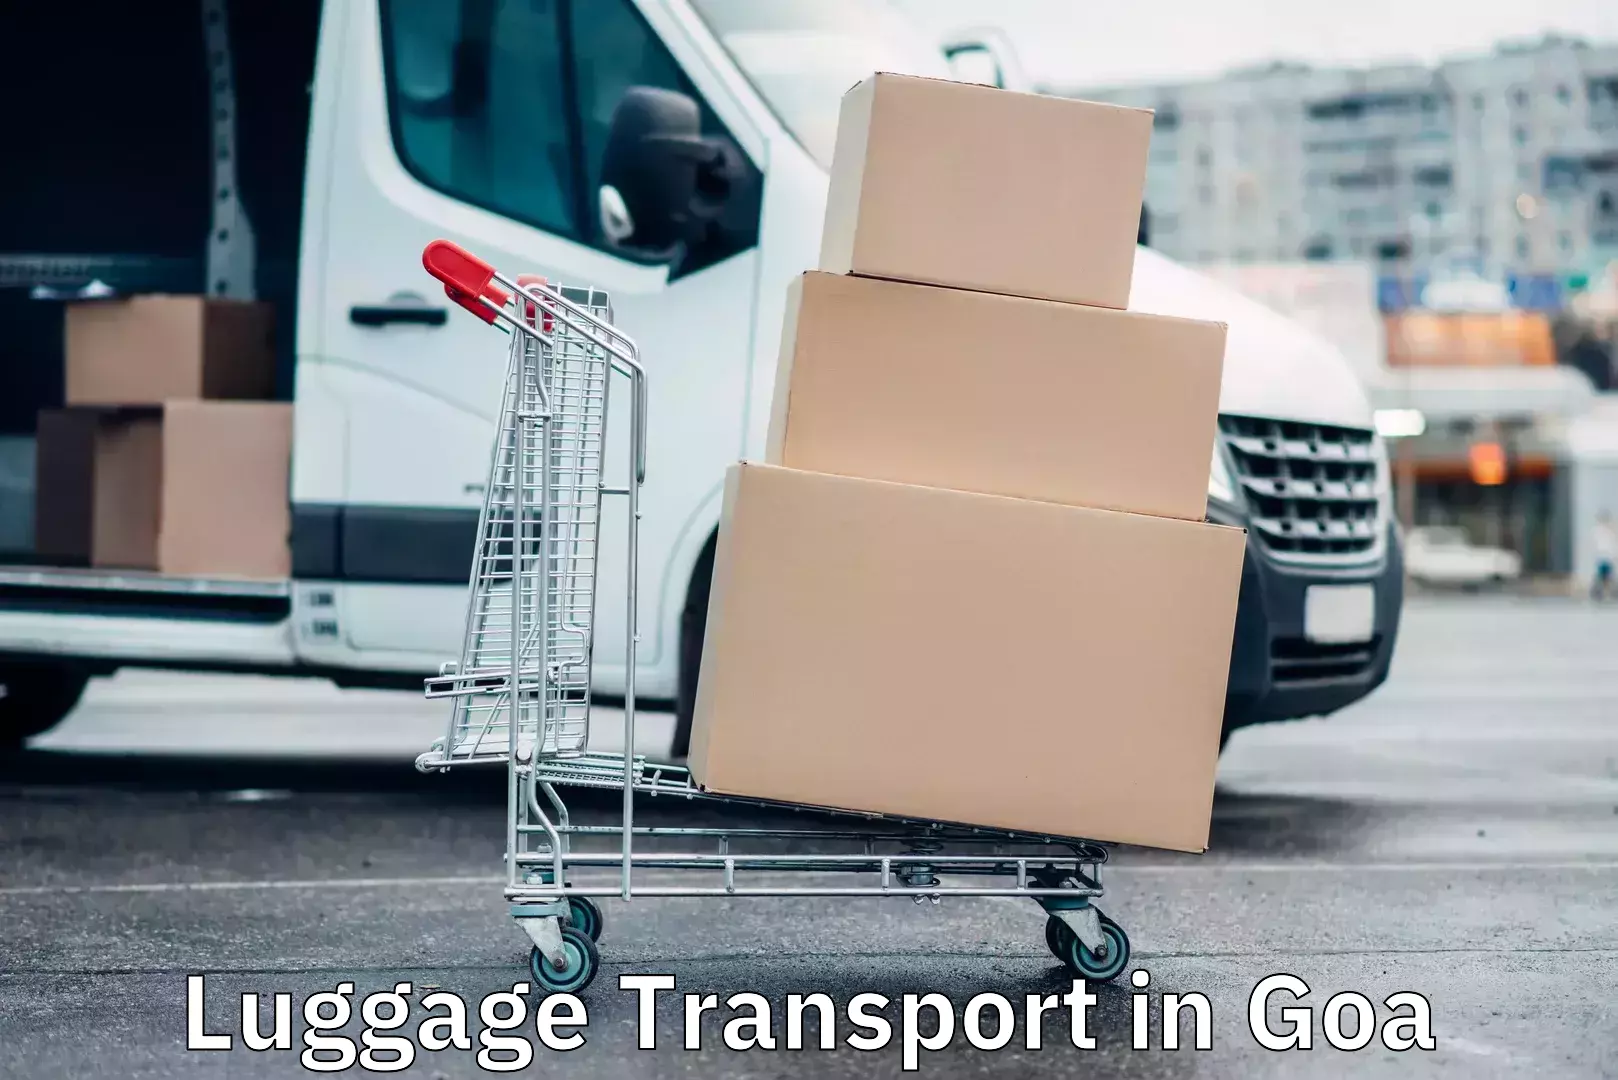 Online luggage shipping in Goa